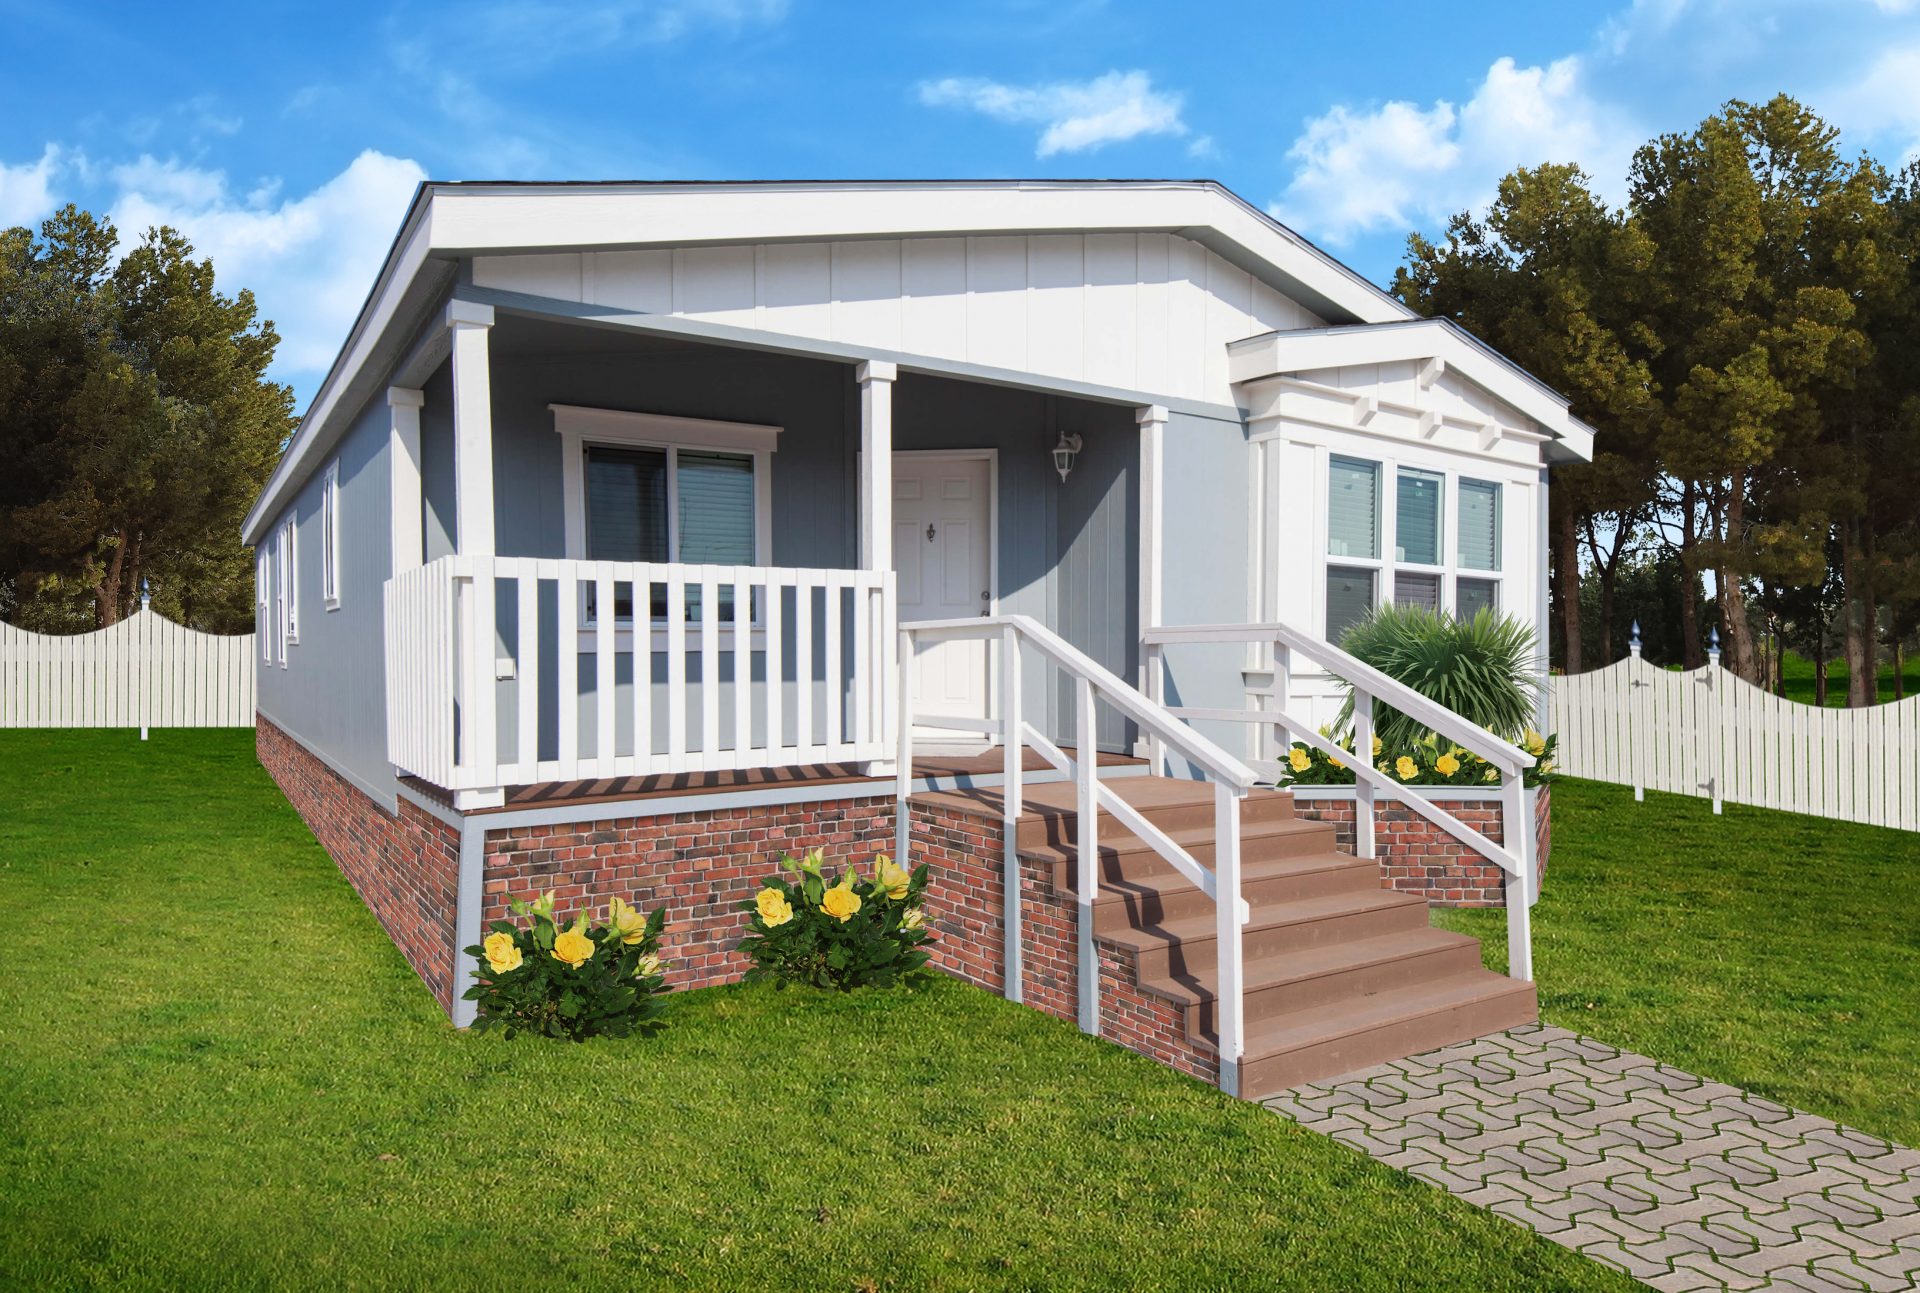 How to Maintain a Manufactured Home